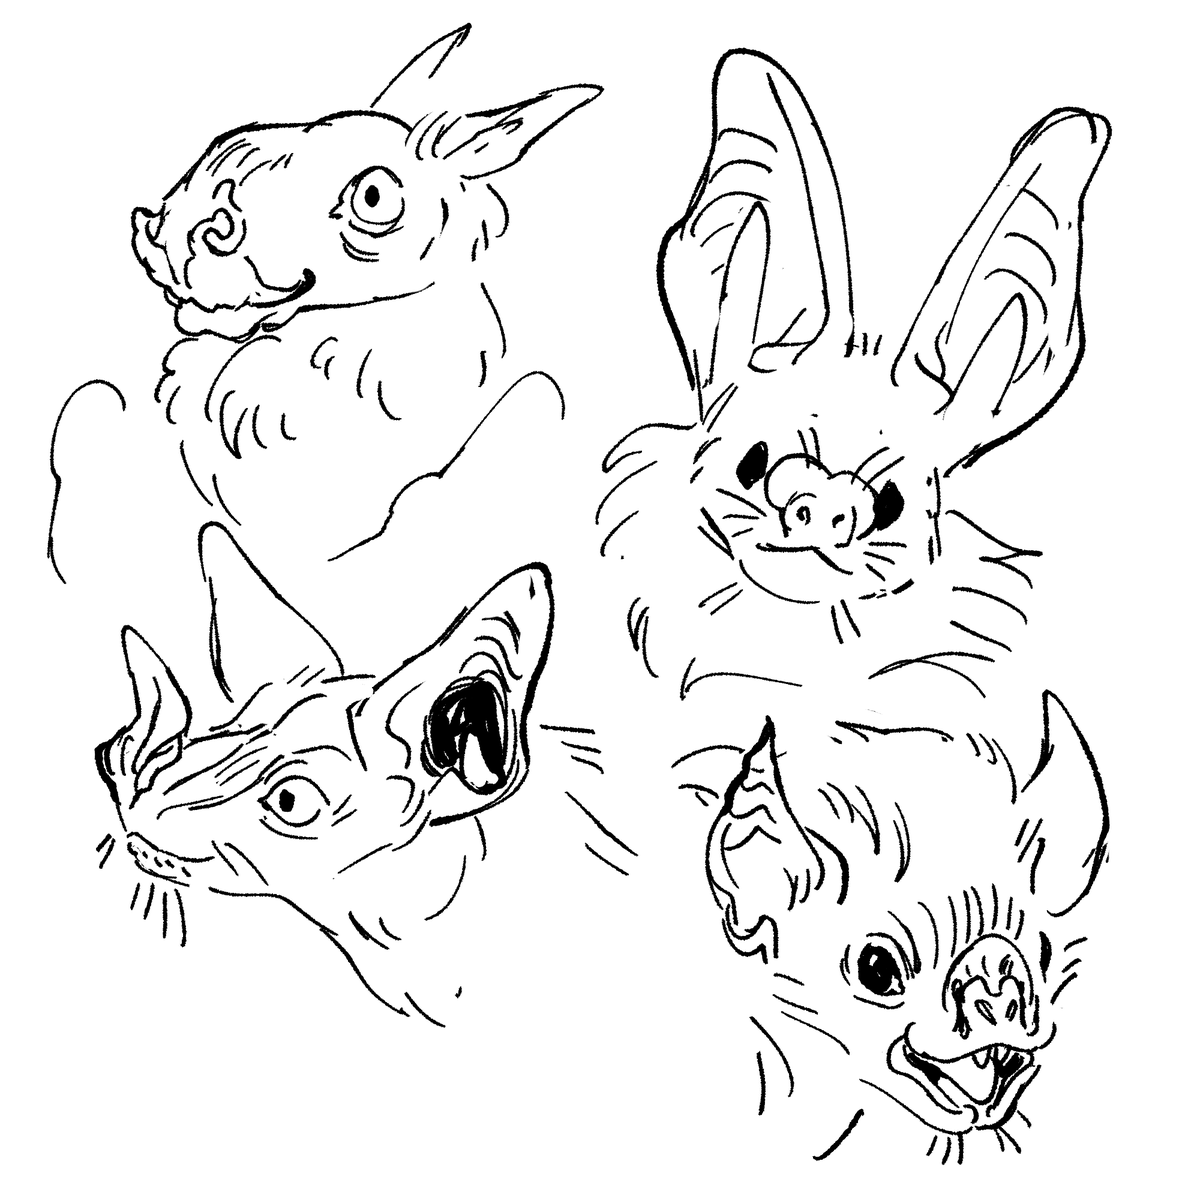 happy international bat day, don't forget about the ugly bats